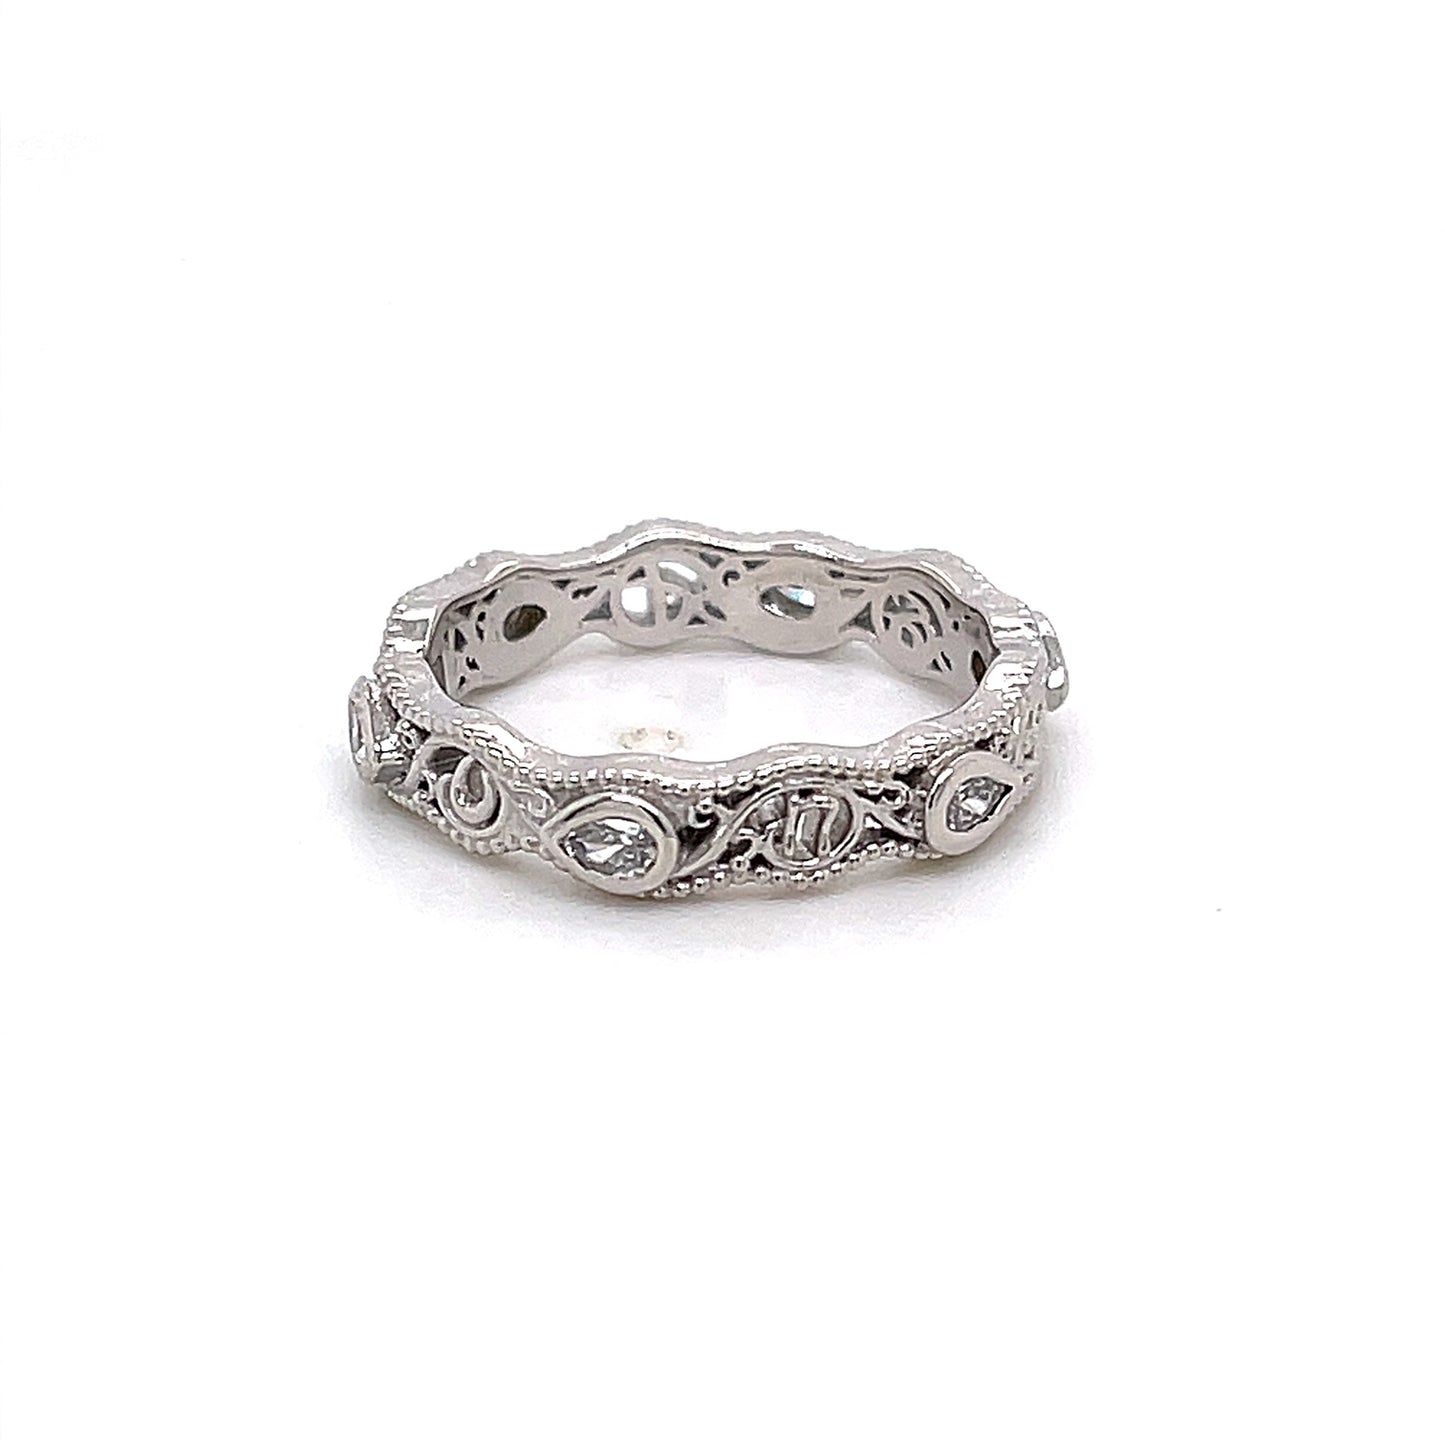 18k White Gold Strong Pair Band